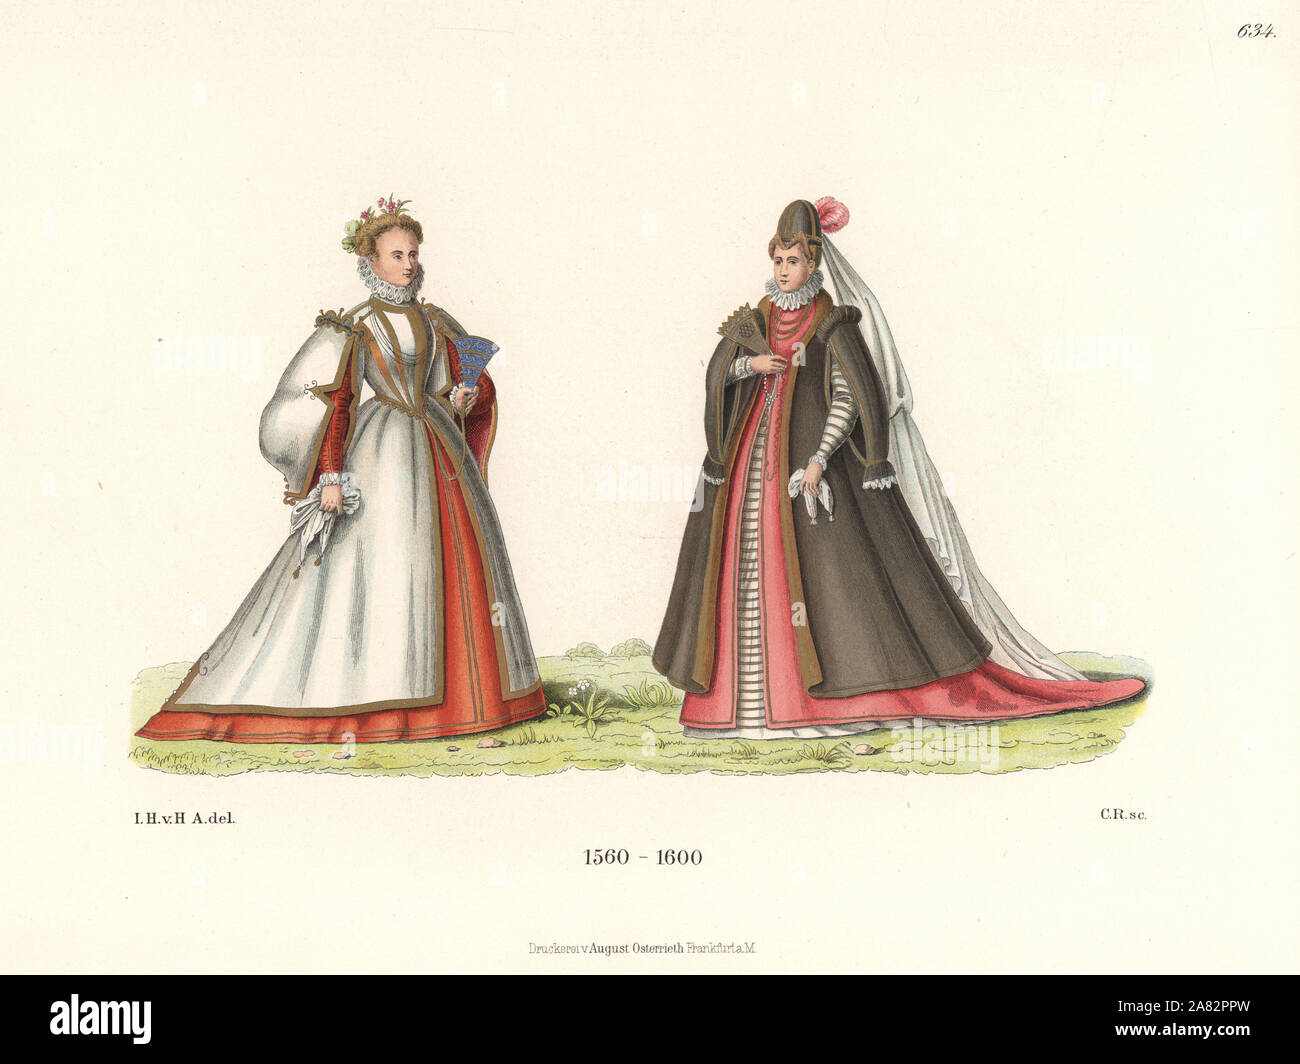 Spanish noblewomen in summer clothes (left) and winter clothes (right), late 16th century. Chromolithograph from Hefner-Alteneck's Costumes, Artworks and Appliances from the Middle Ages to the 17th Century, Frankfurt, 1889. Illustration by Dr. Jakob Heinrich von Hefner-Alteneck, lithographed by C. Regnier. Dr. Hefner-Alteneck (1811-1903) was a German museum curator, archaeologist, art historian, illustrator and etcher. Stock Photo